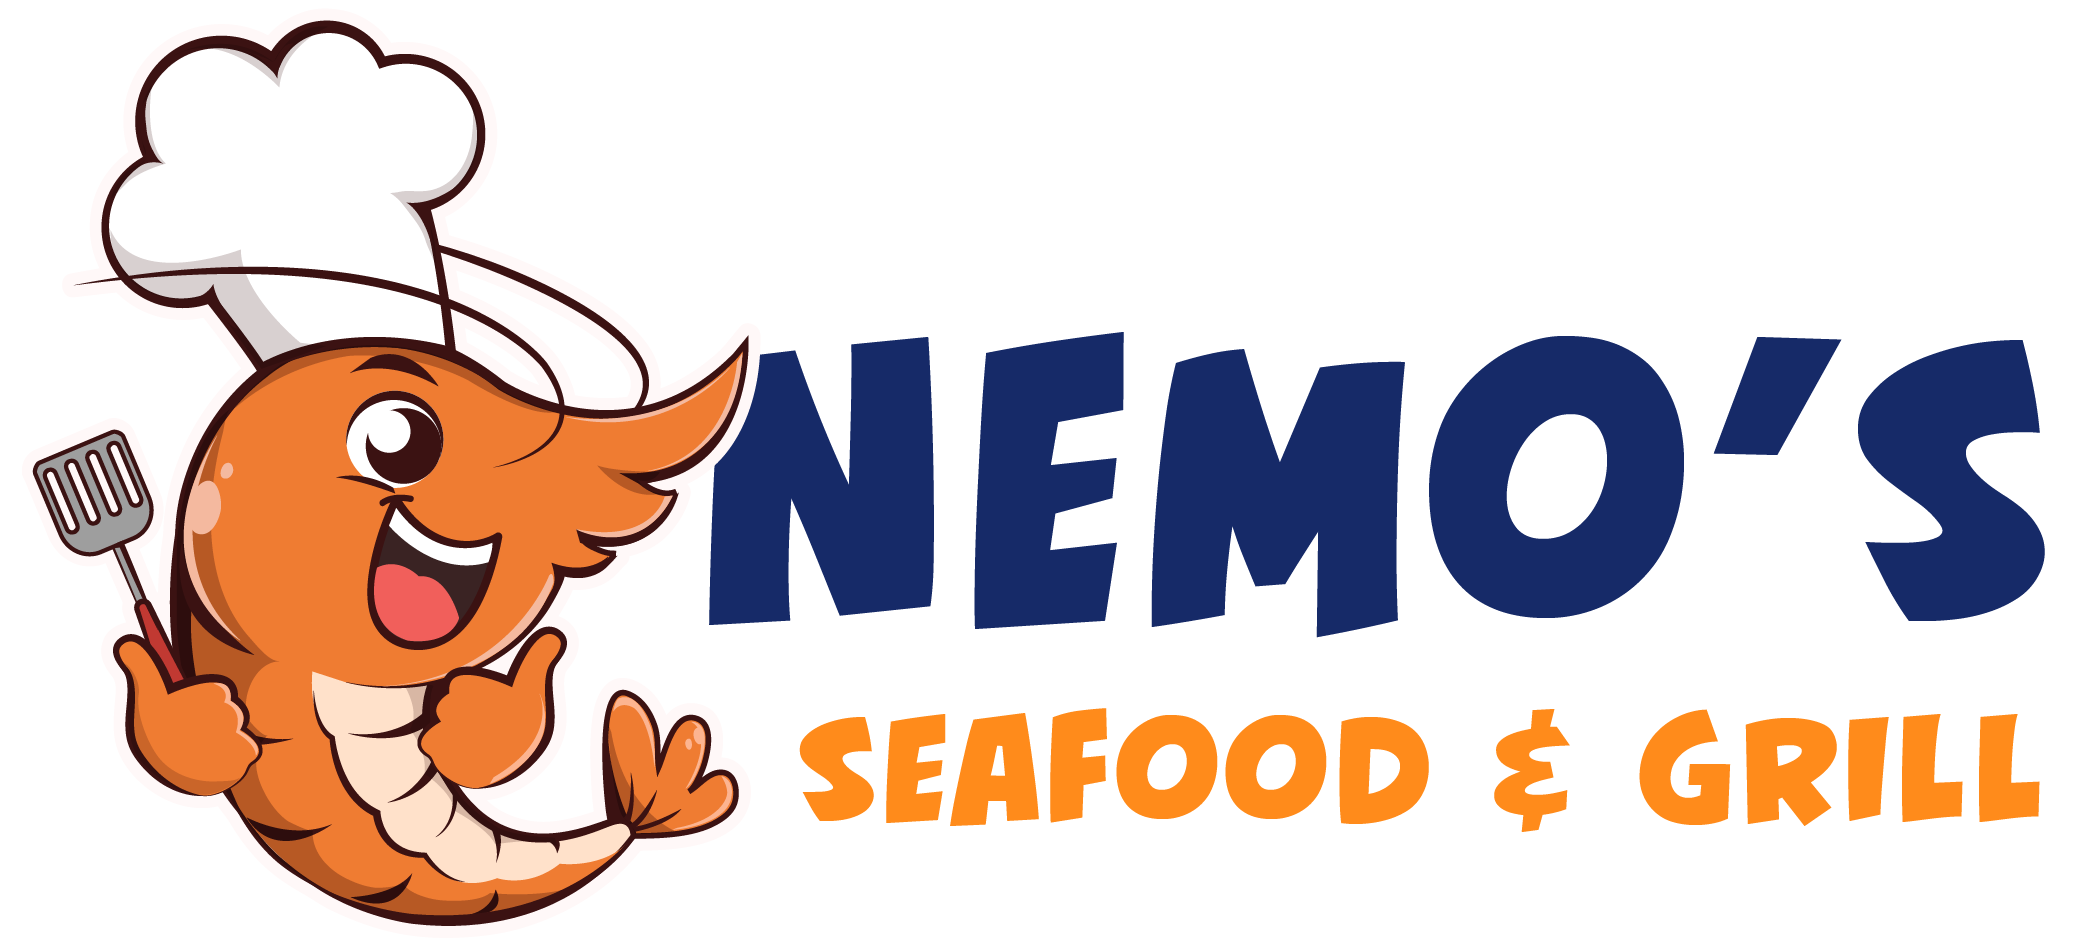 Nemo's Seafood Grill